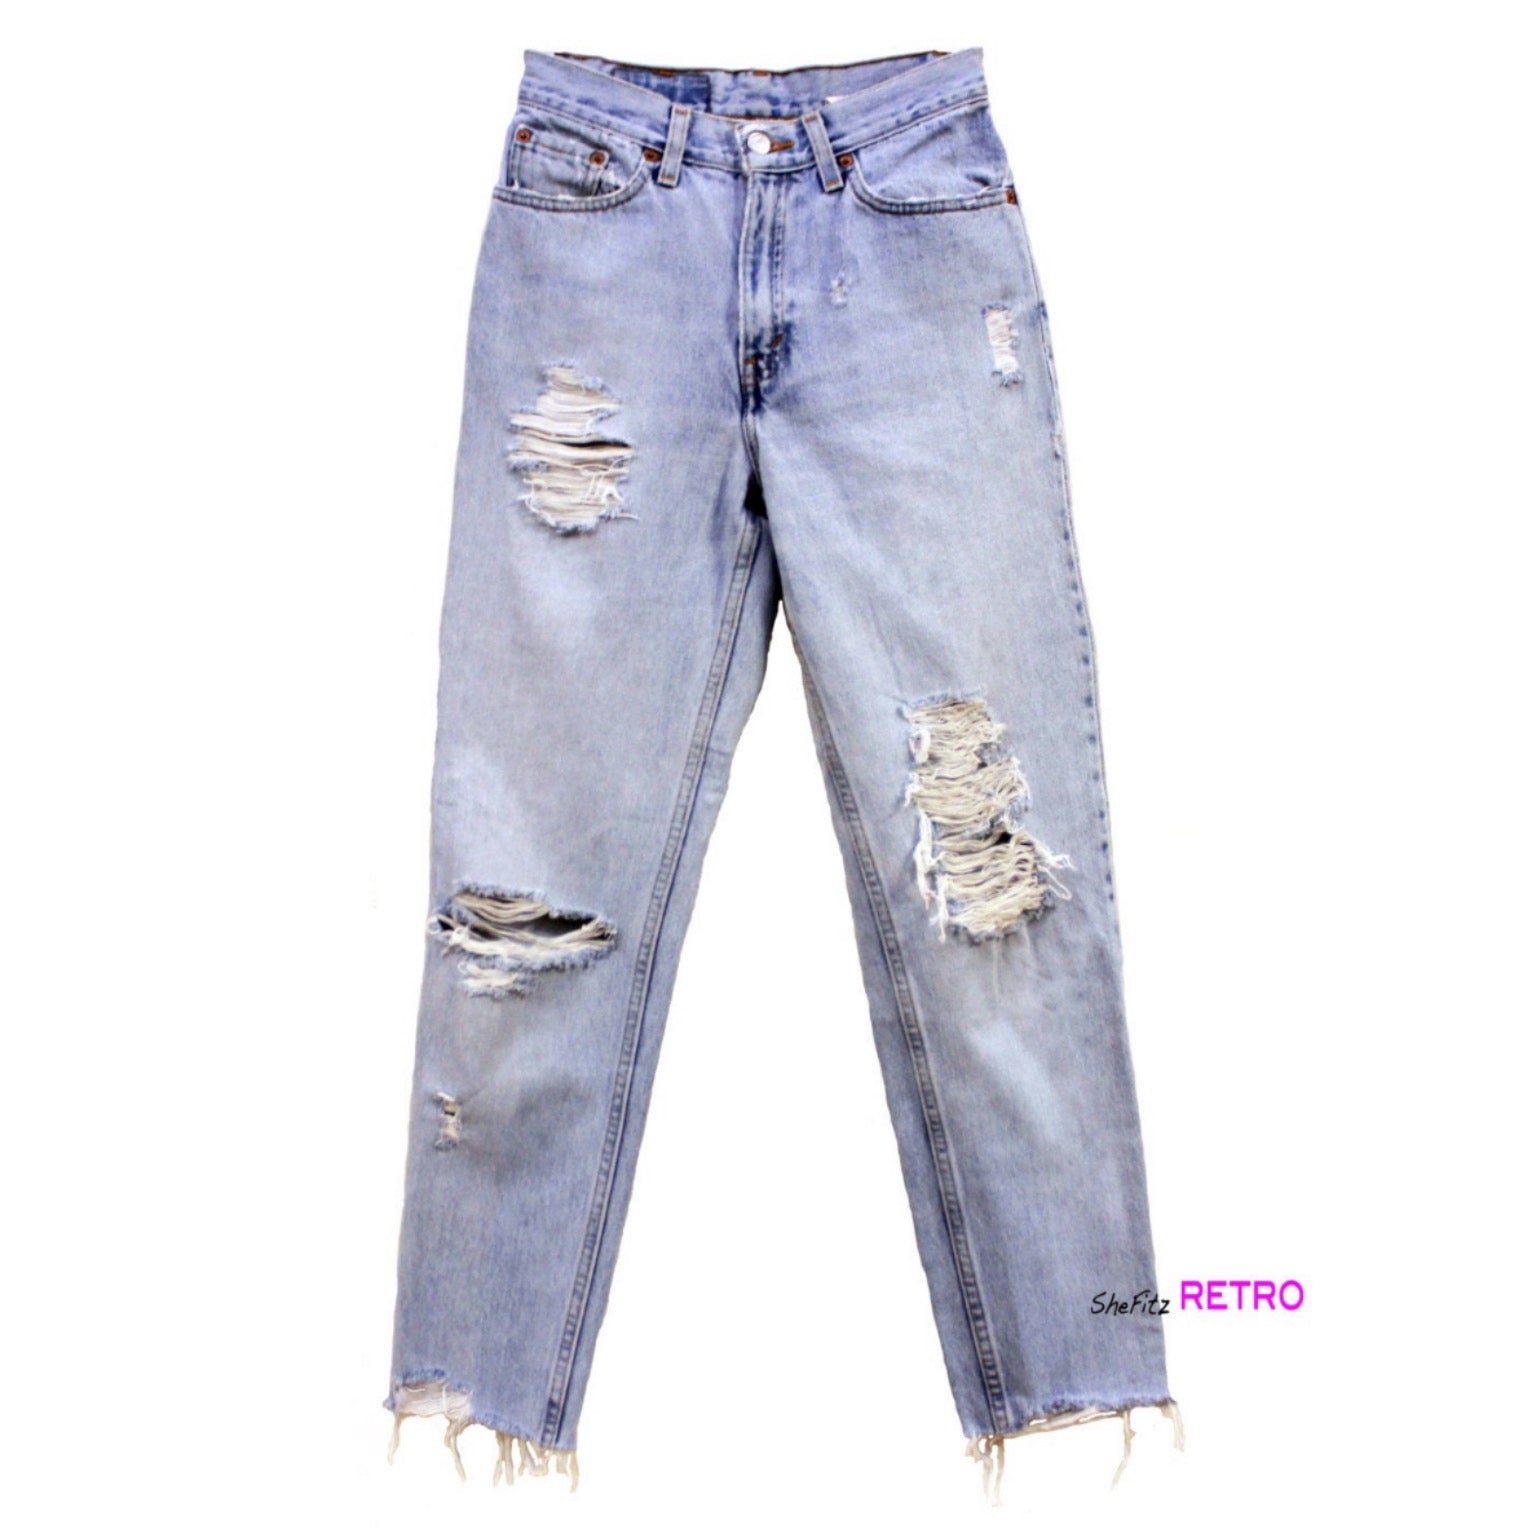 Made To Order Vintage High Waisted Distressed Levis Cut Off Ankle Hem Jeans